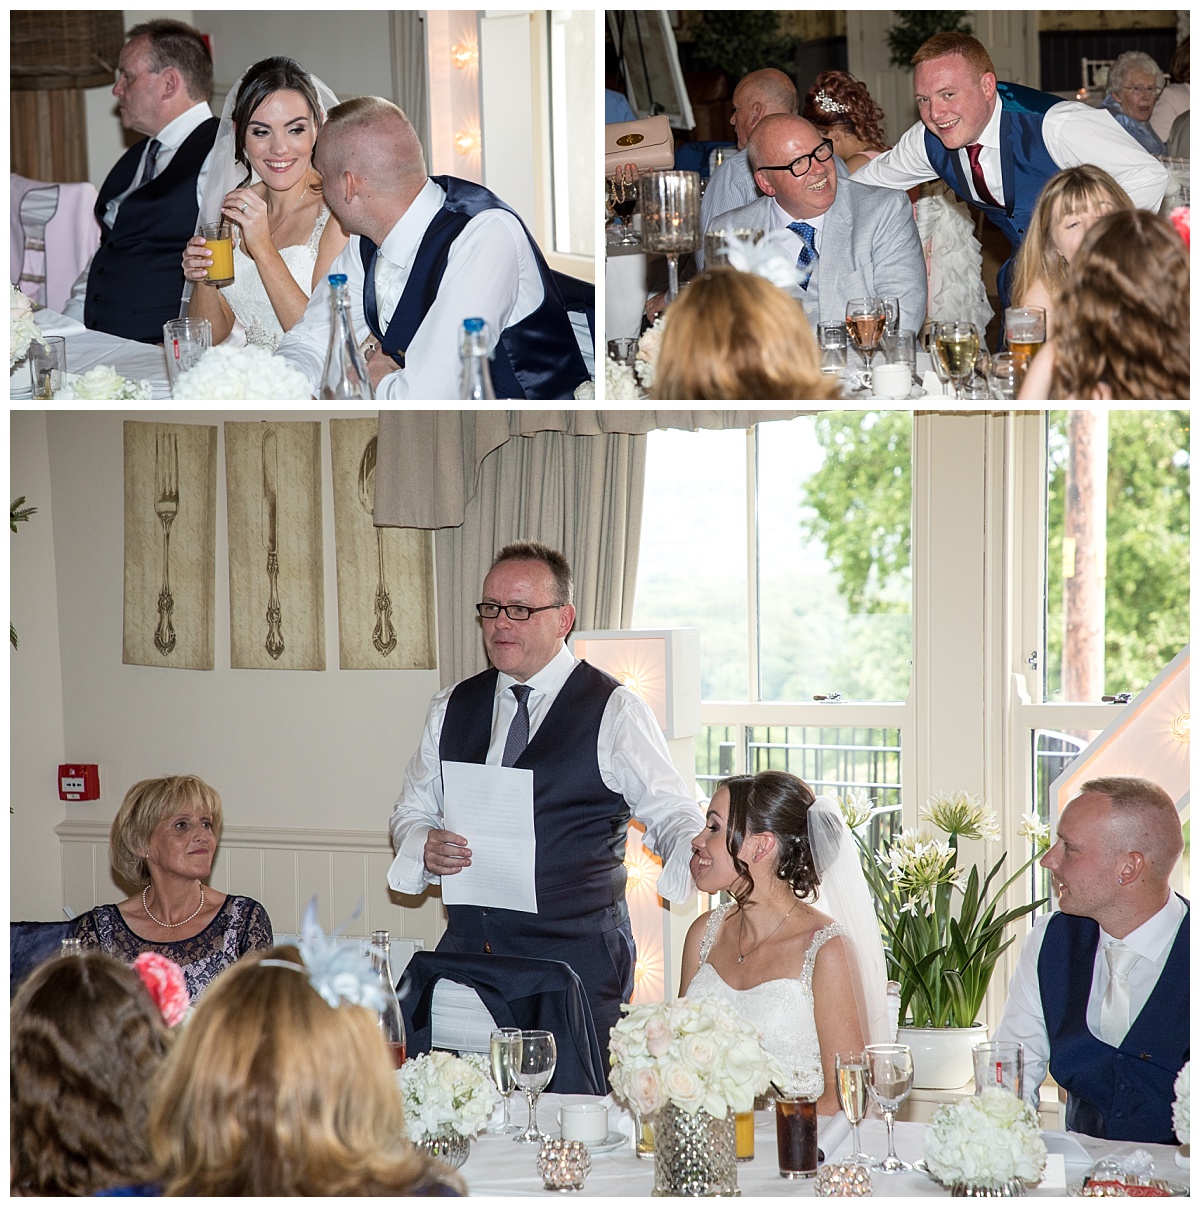 Wedding Photography Manchester - Victoria and Phillips Shireburn Arms wedding 70